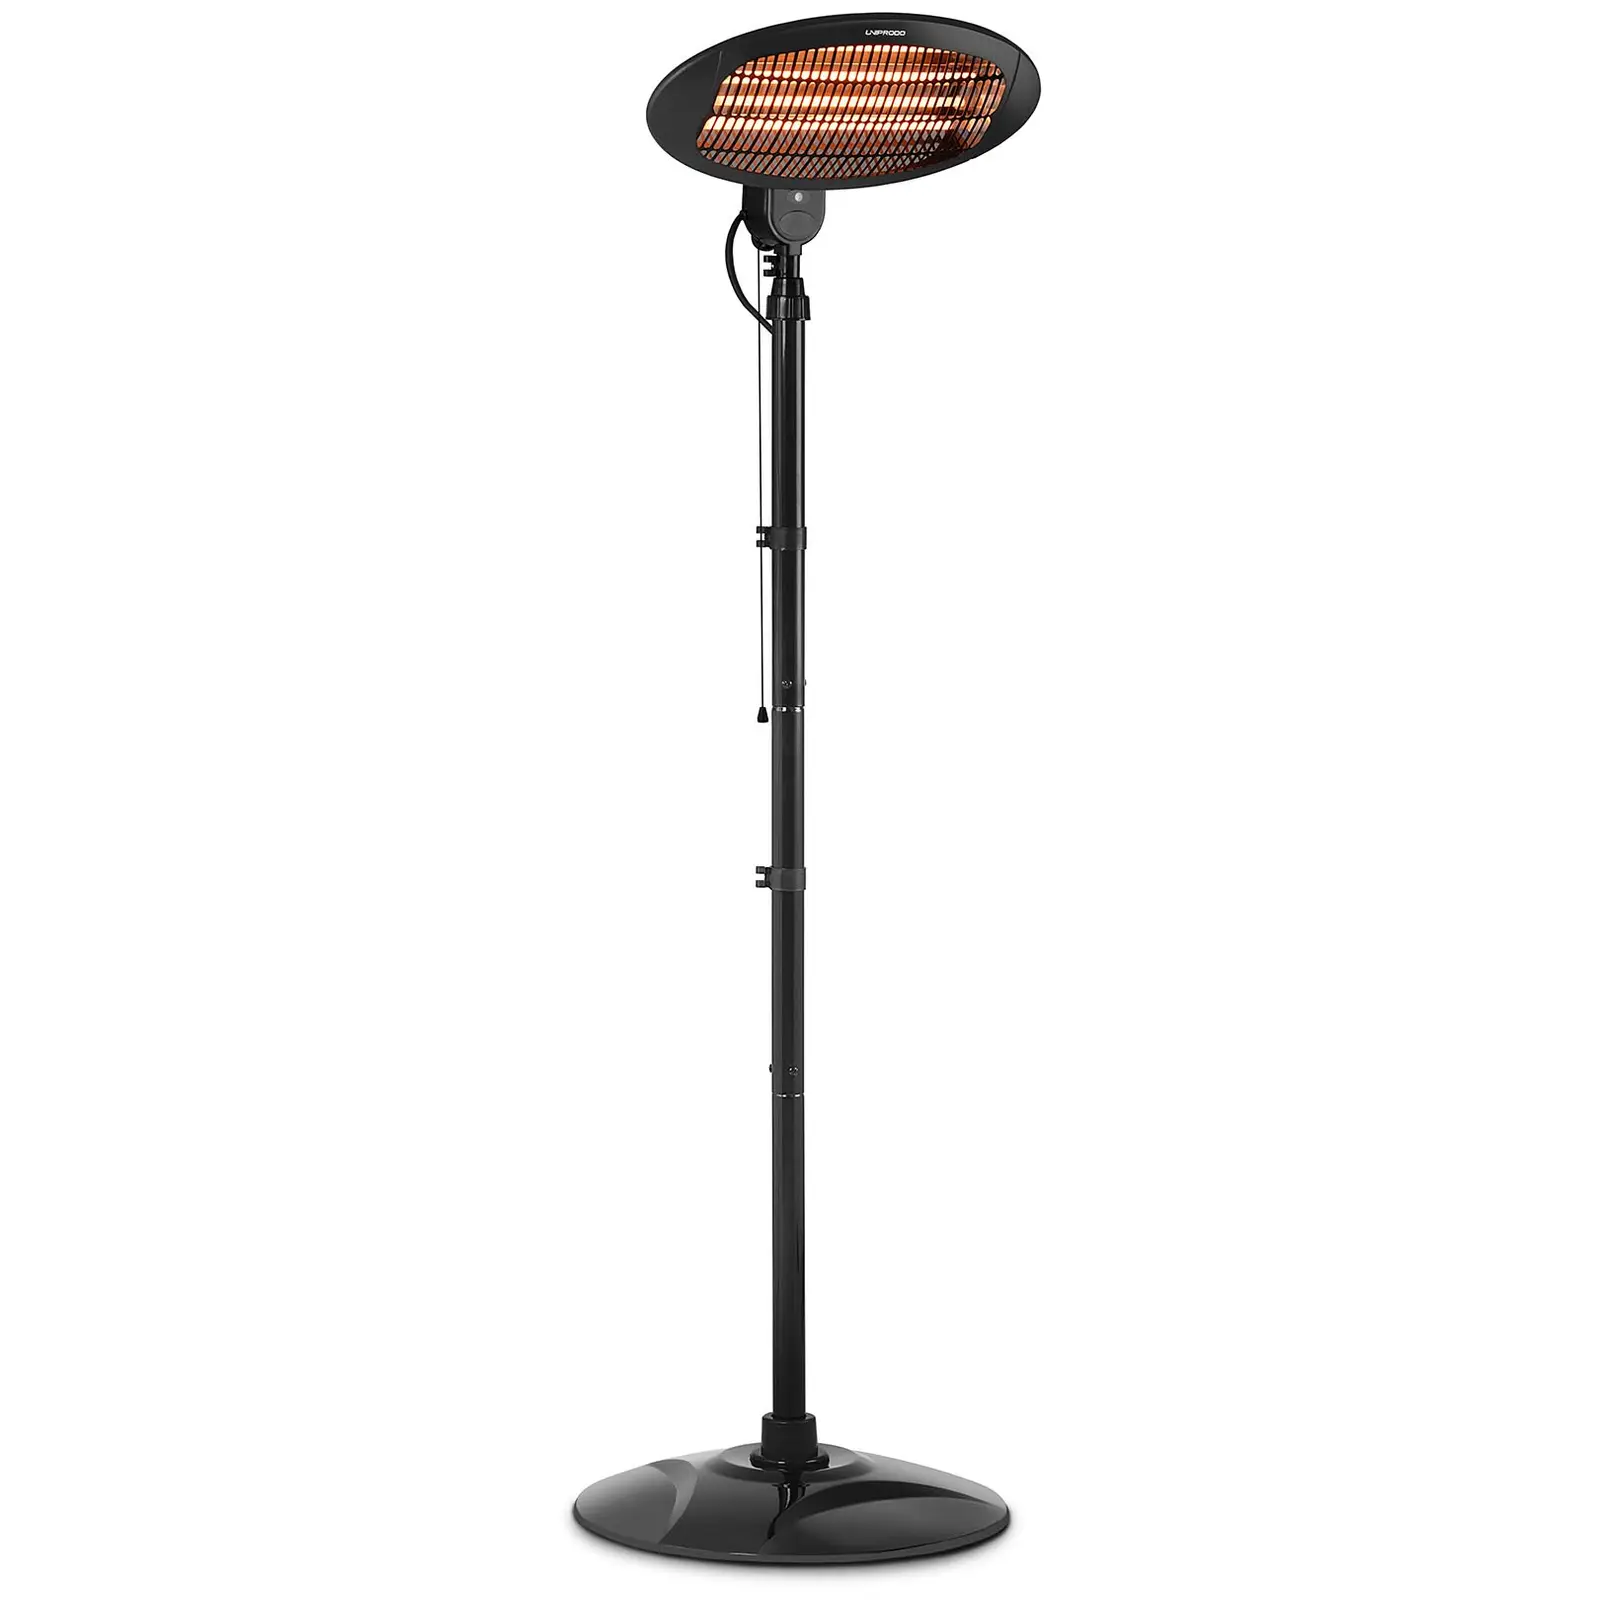 Factory second Patio infrared heater